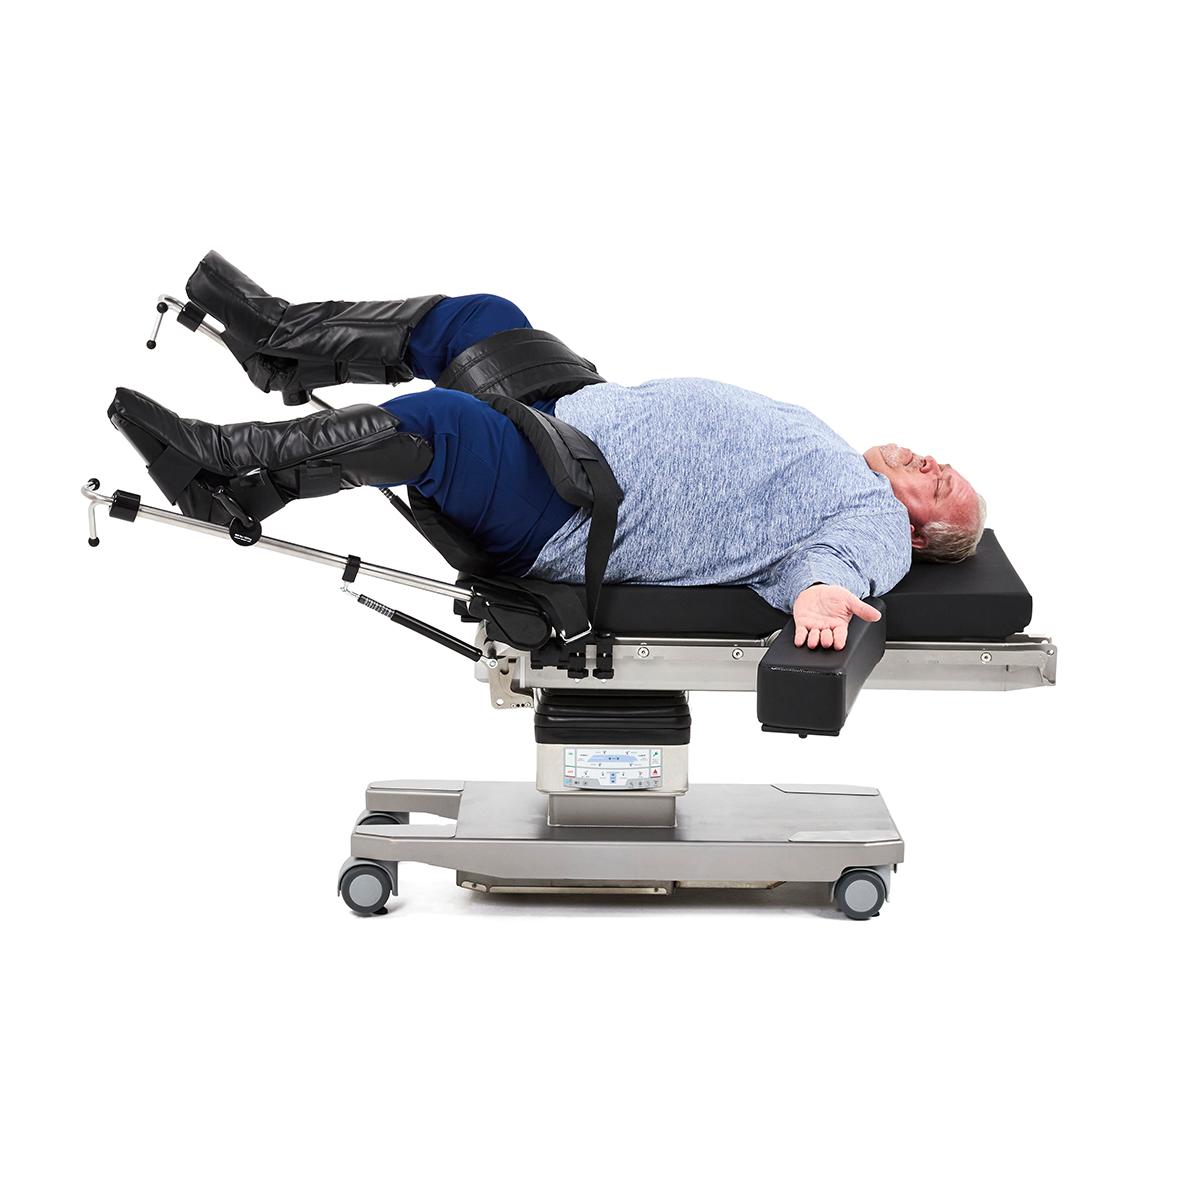 Patient positioned on Hillrom surgical table equipped with General Bariatric accessories.